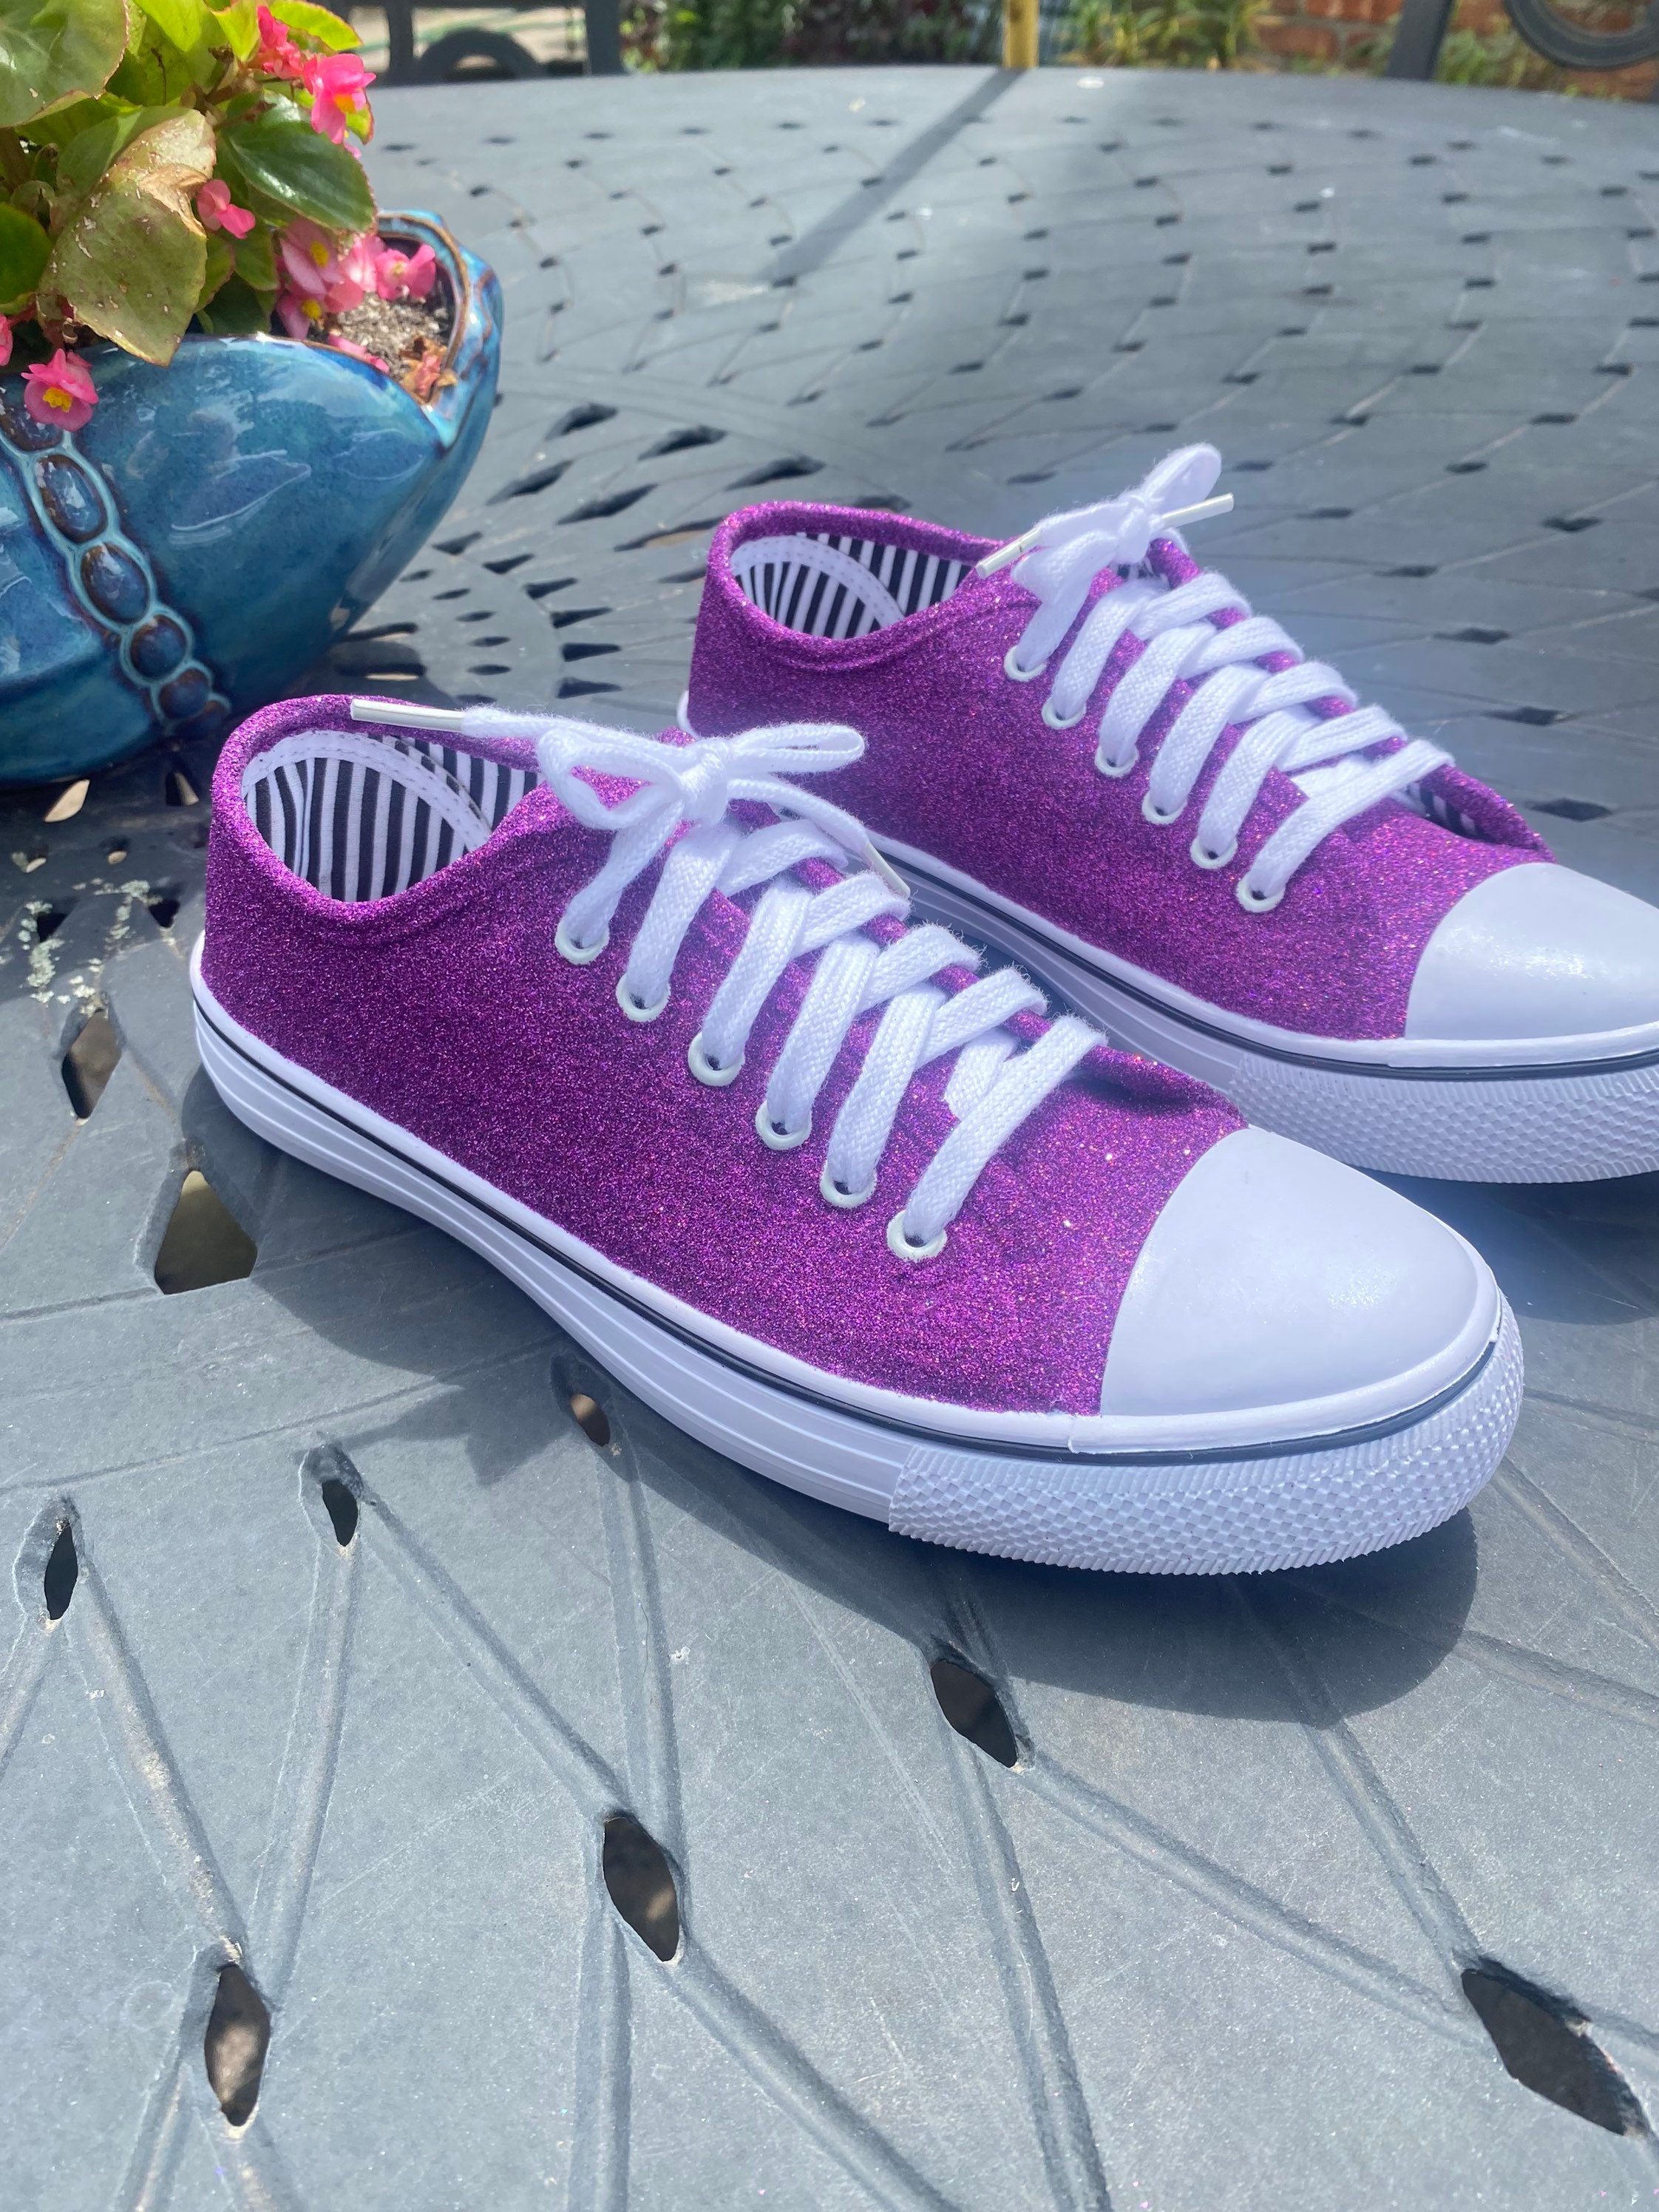 Women's Glitter Tennis Sneakers Floral Dressy Sparkly Sneakers Wedding  Bridal Shiny Sequin Shoe Fashion Purple Casual Shoes Flat